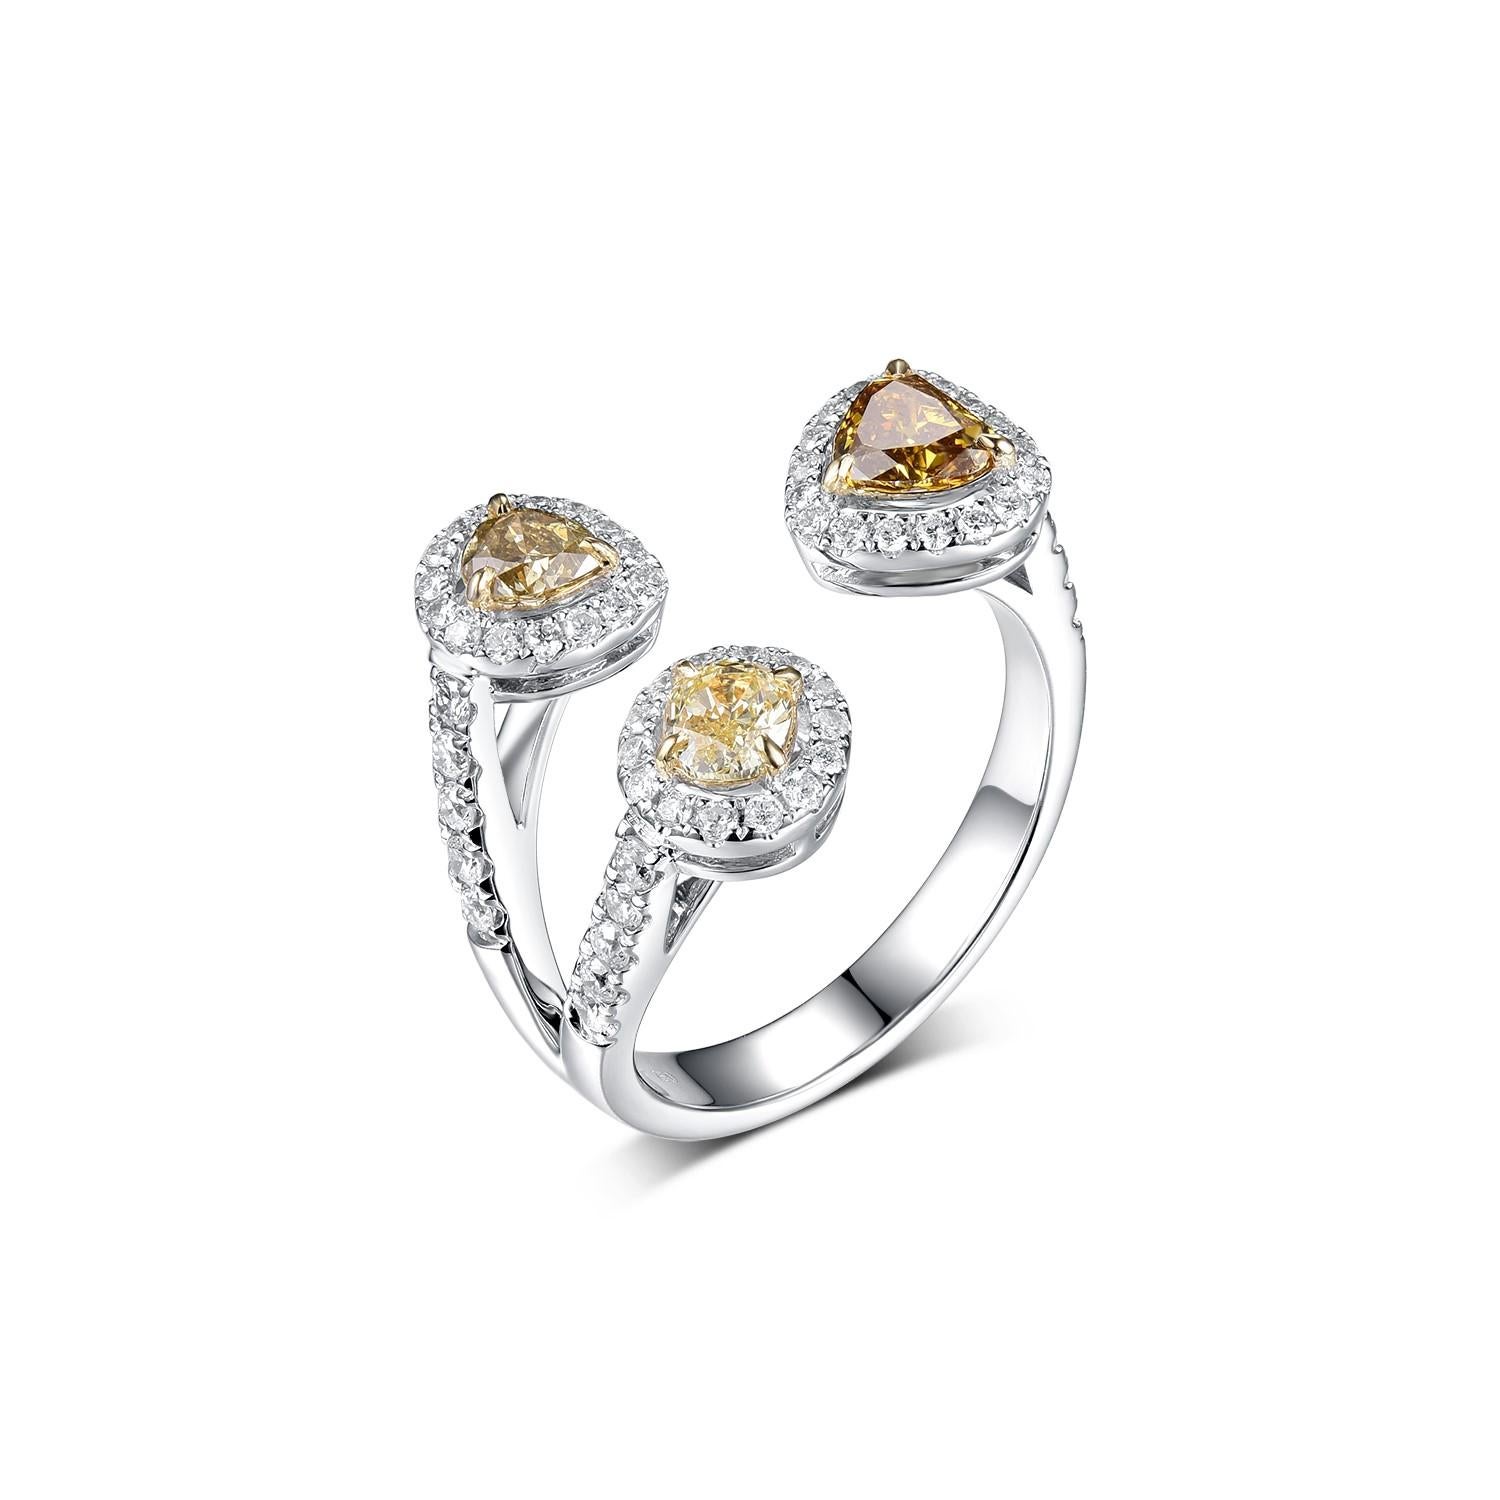 This ring features 0.81 carat of fancy yellow diamonds and 0.47 carat of round diamonds set in a bypass design. Diamonds are set in 18 karat white gold and the body of the ring is made with 18 karat white and rose gold. Resizing is available.
US